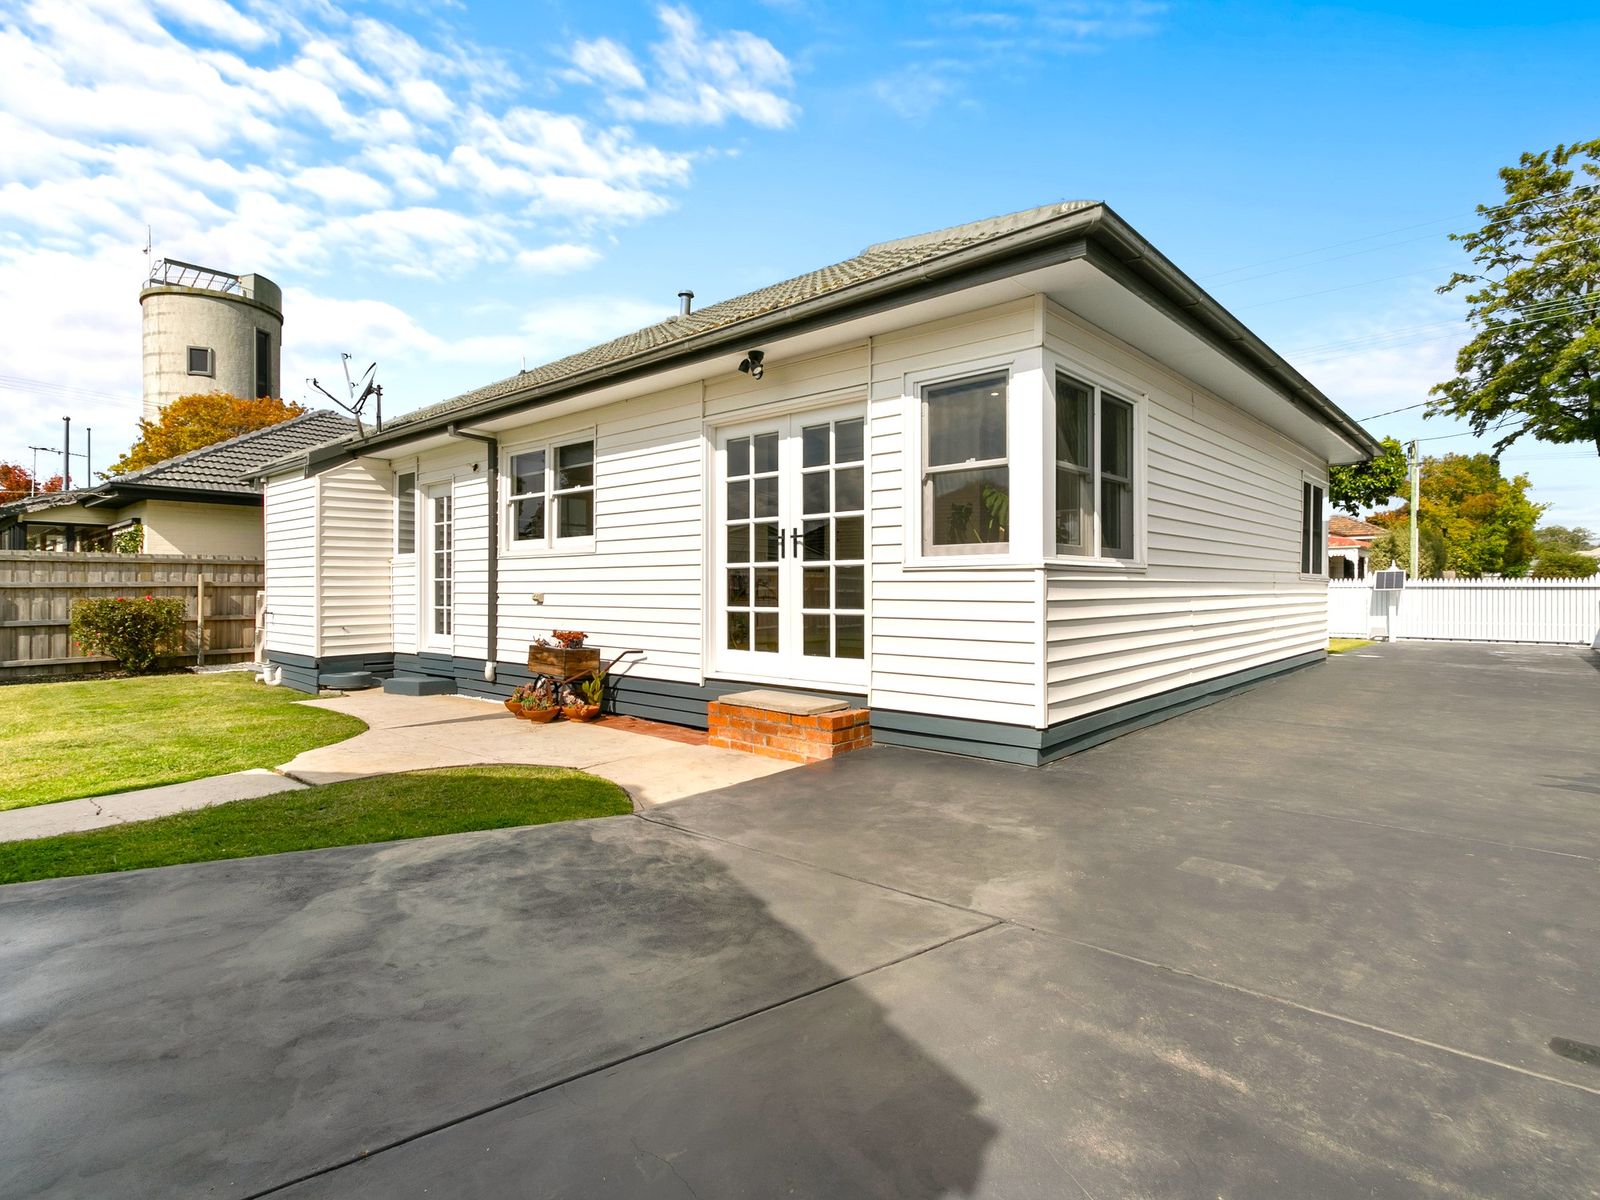 edited 028 Open2view ID878653 44 Henry Street   Traralgon